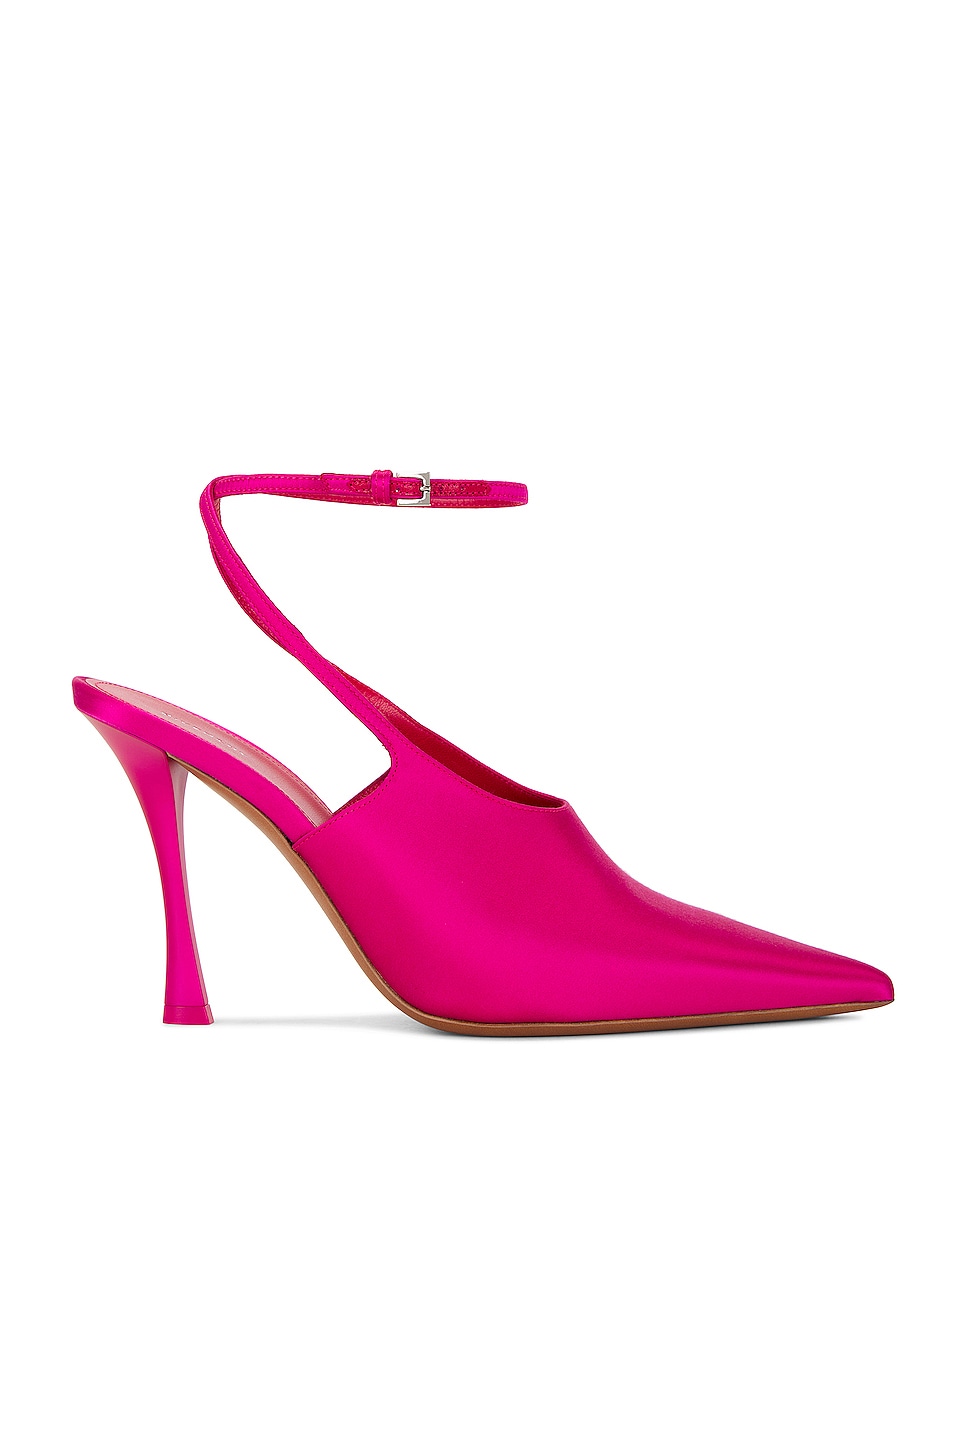 Image 1 of Givenchy Show Slingback Pump in Neon Pink